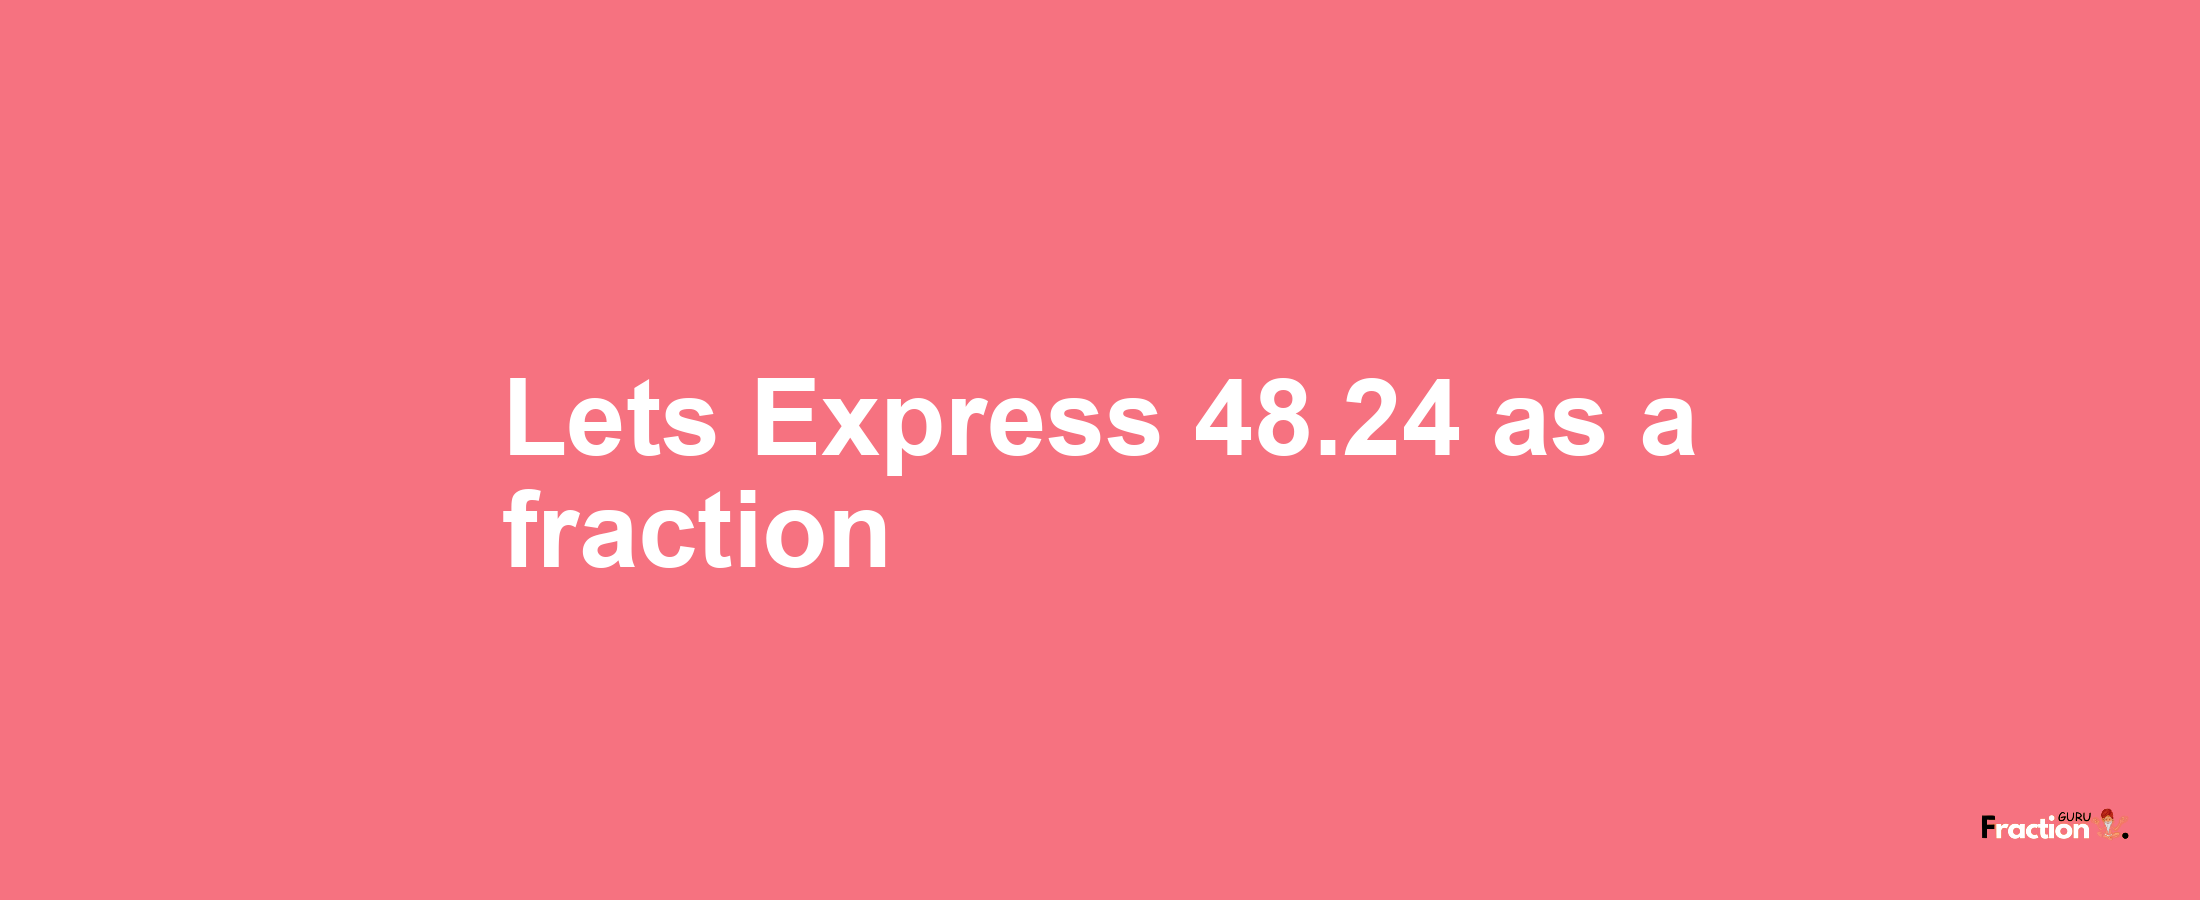 Lets Express 48.24 as afraction